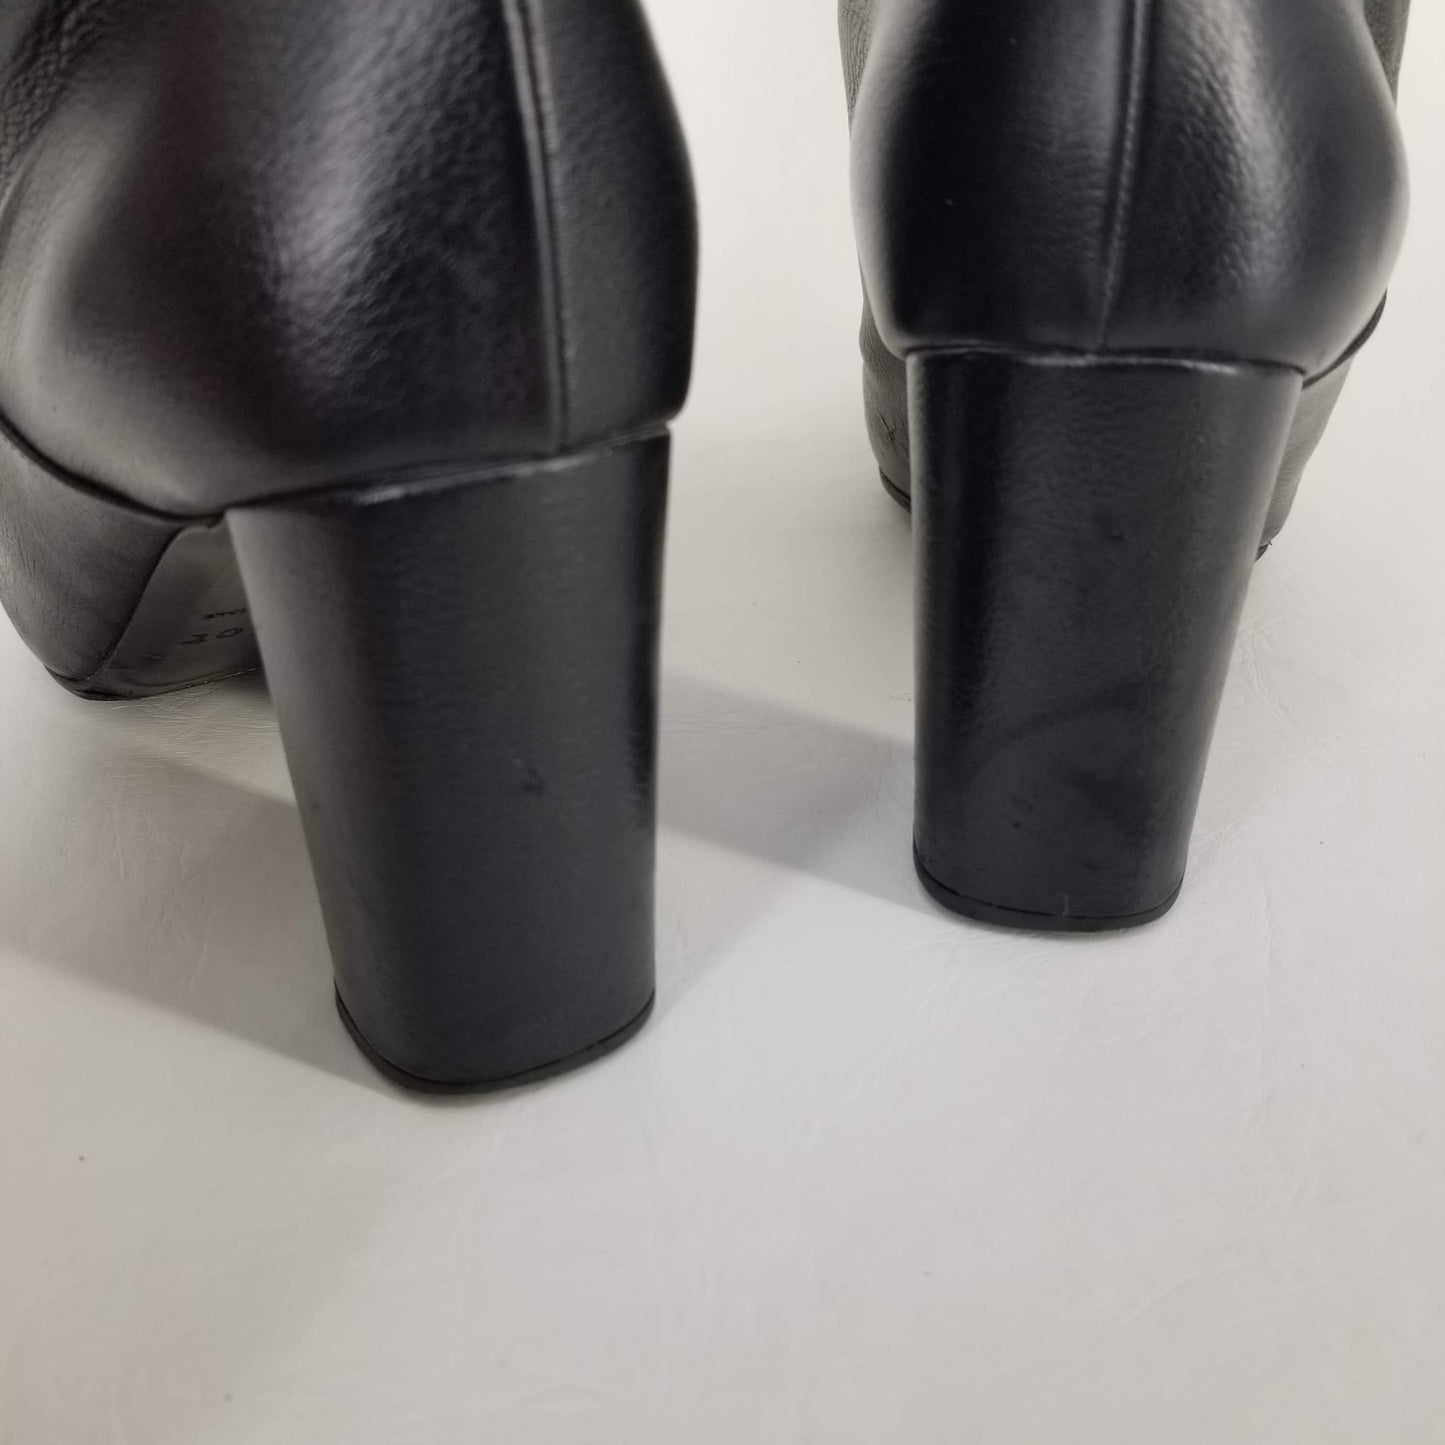 Authentic Dior Black Leather Boots